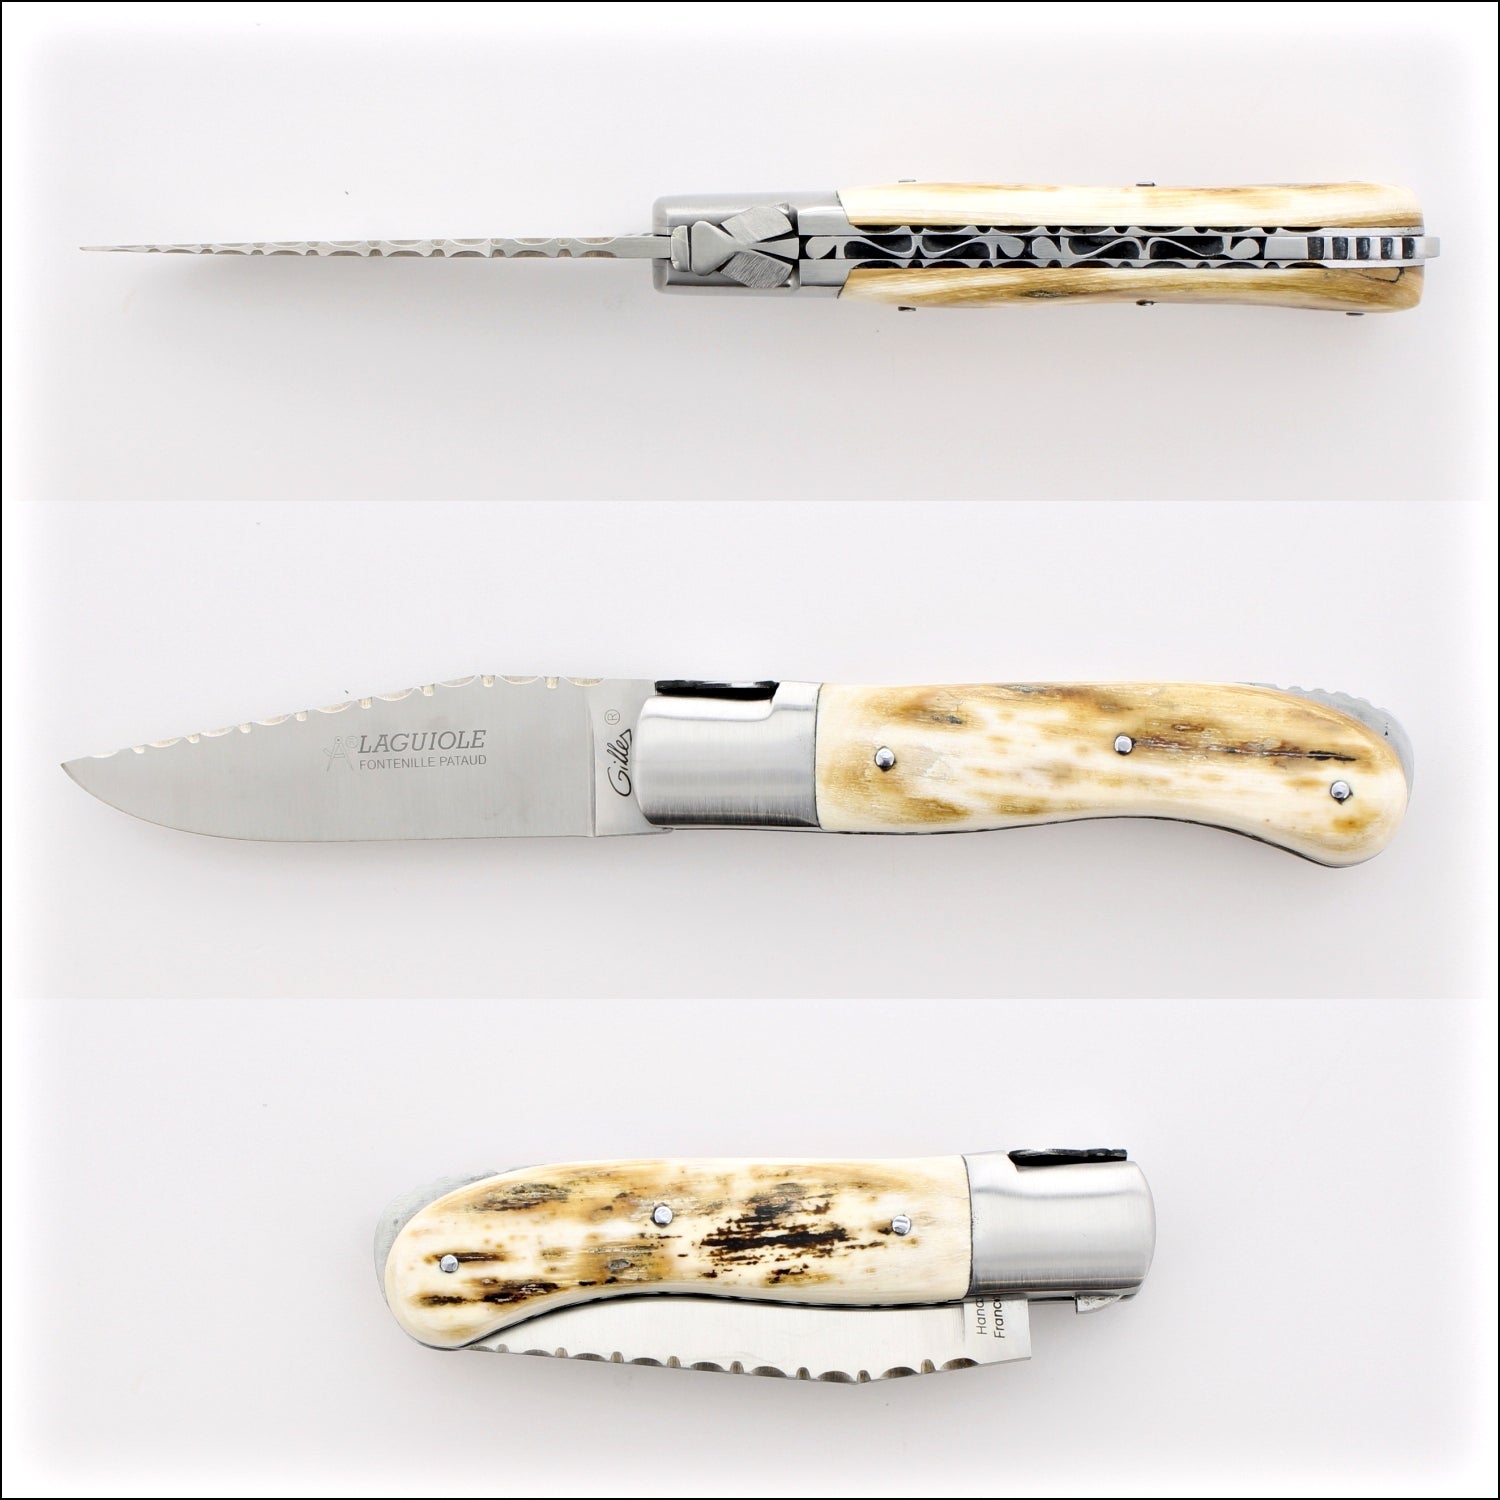 Laguiole Gentleman's Knife Guilloche - Mammoth Ivory - Brushed Finish